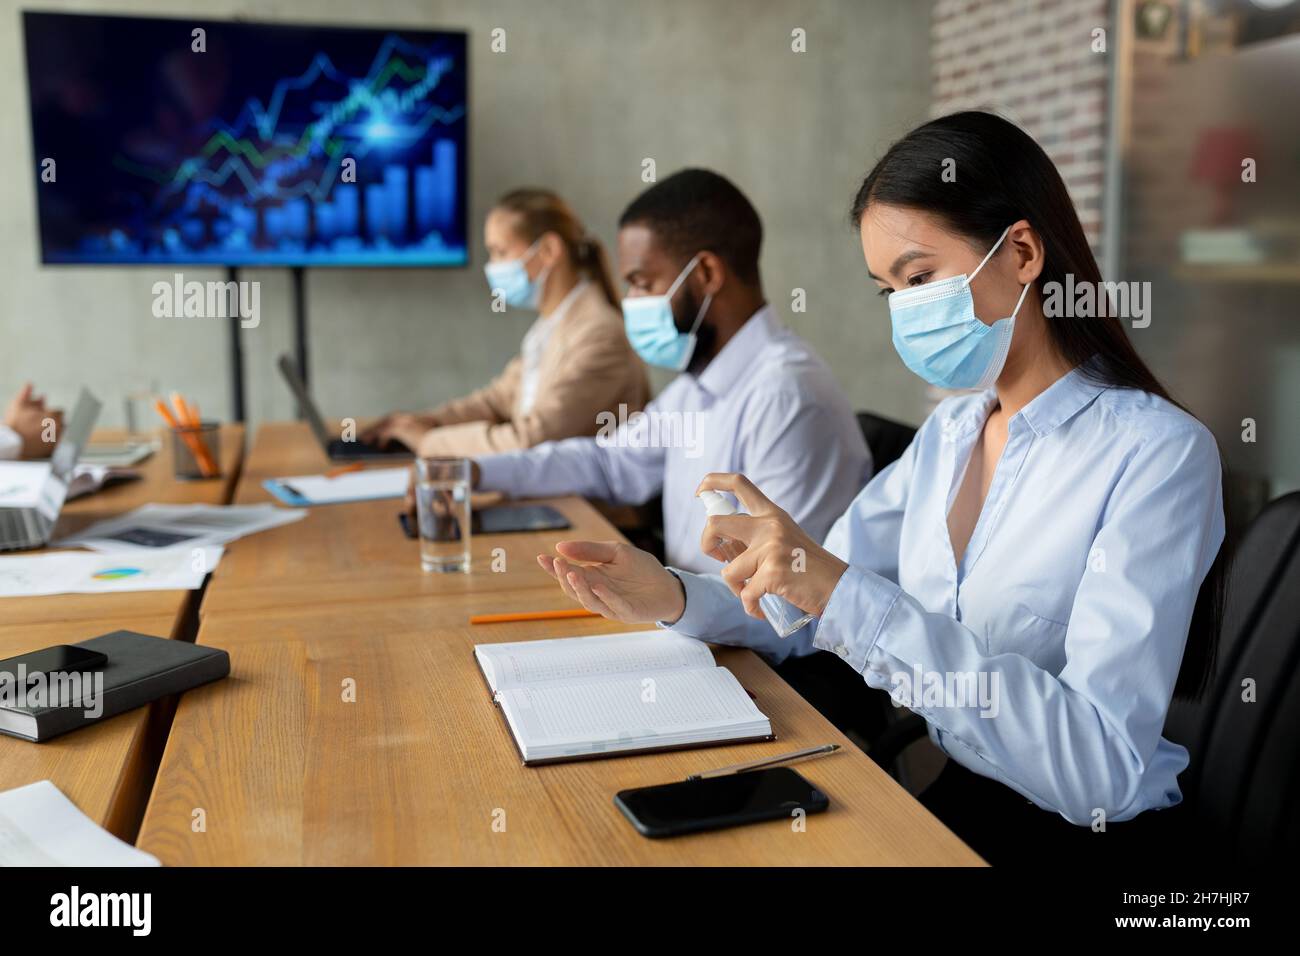 New Normal. Asian Female In Face Mask Using Disinfectant Spray In Office Stock Photo